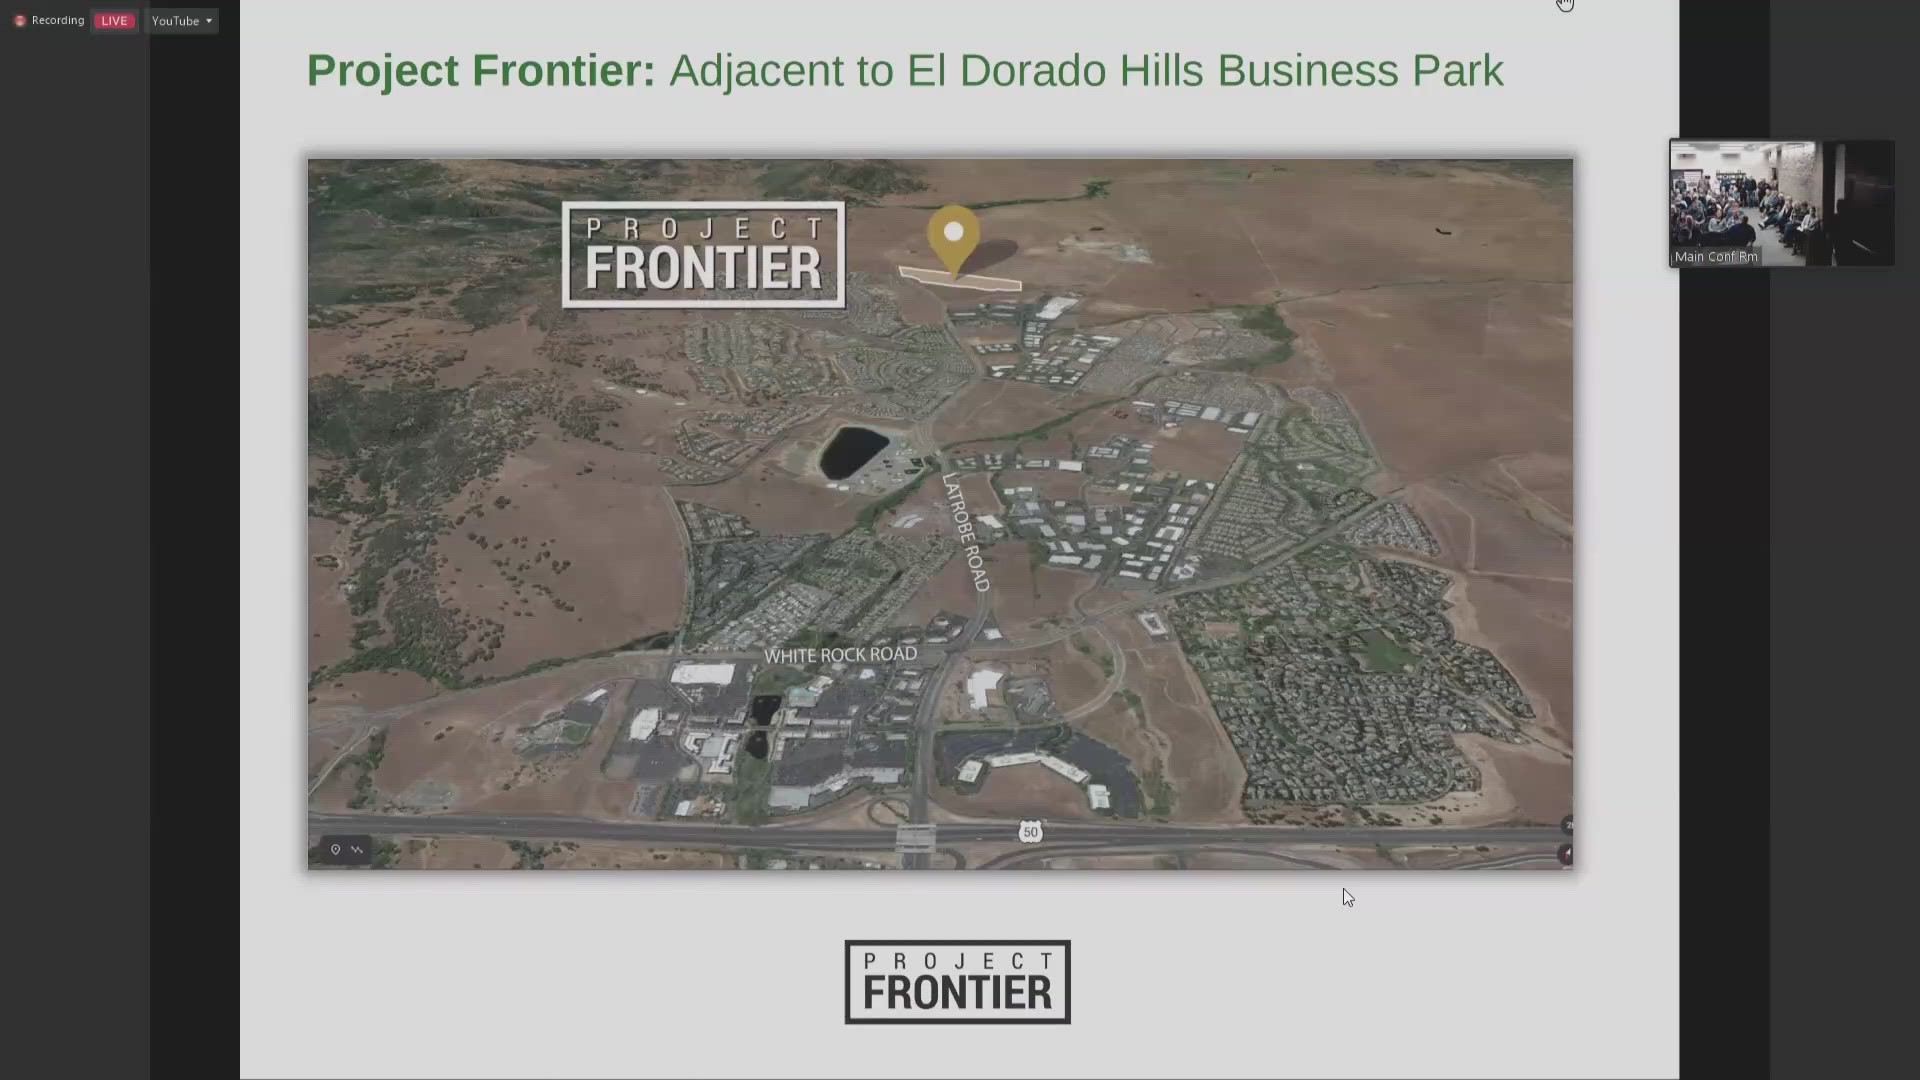 People in El Dorado Hills voiced opposition to proposed distribution centers slated for the area.